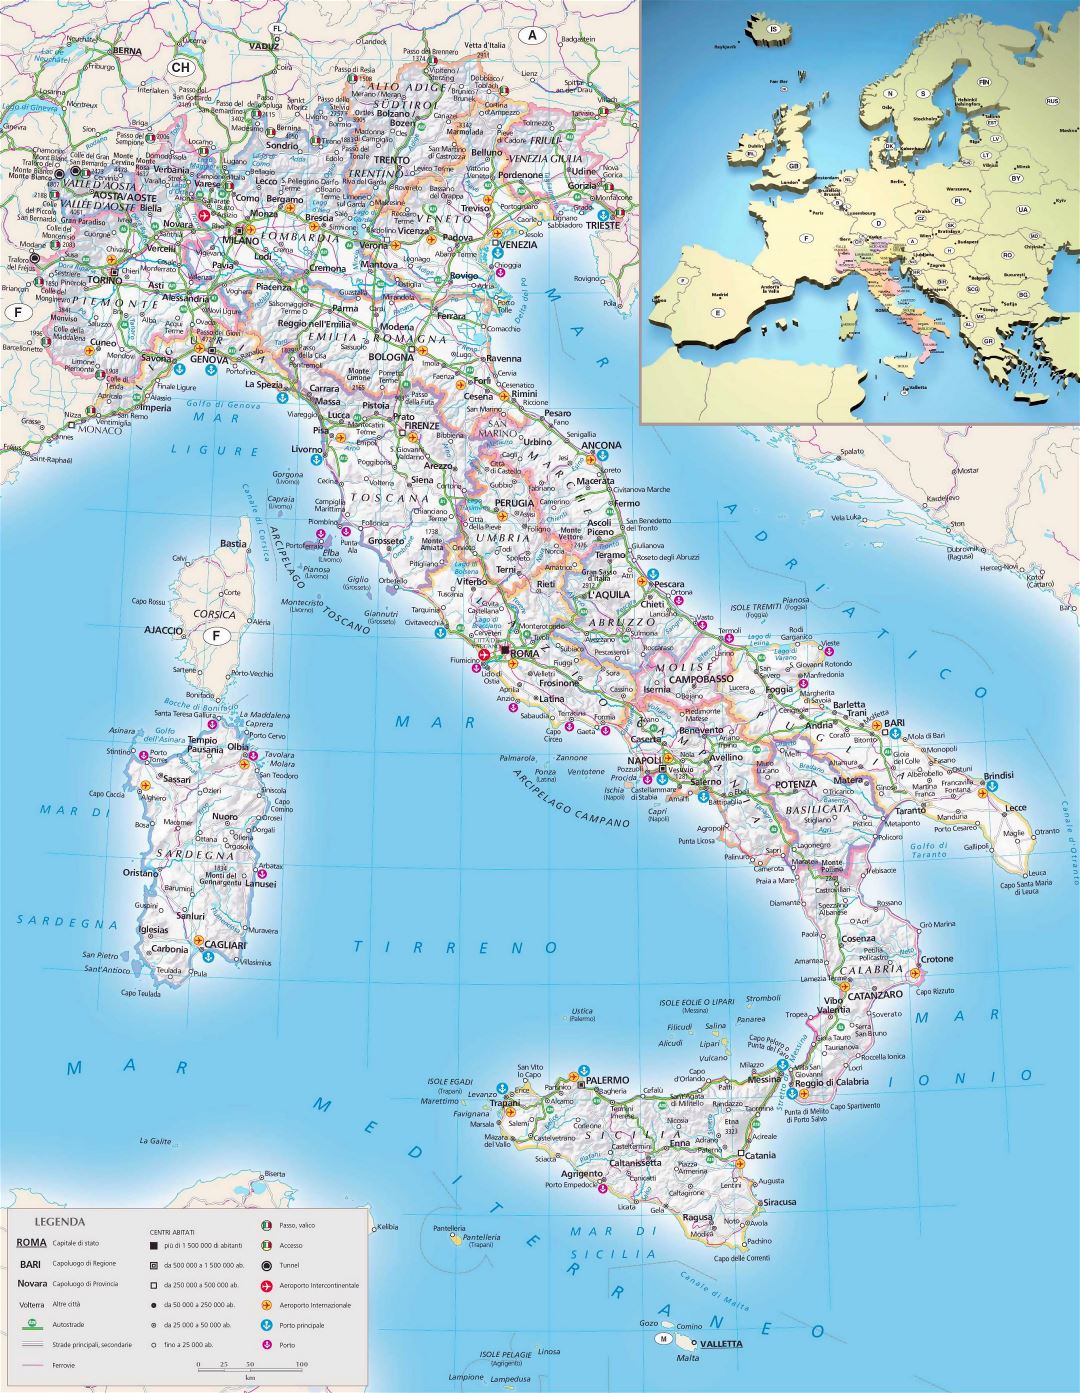 Large scale political and administrative map of Italy with relief, roads, cities, seaports, airports and other marks